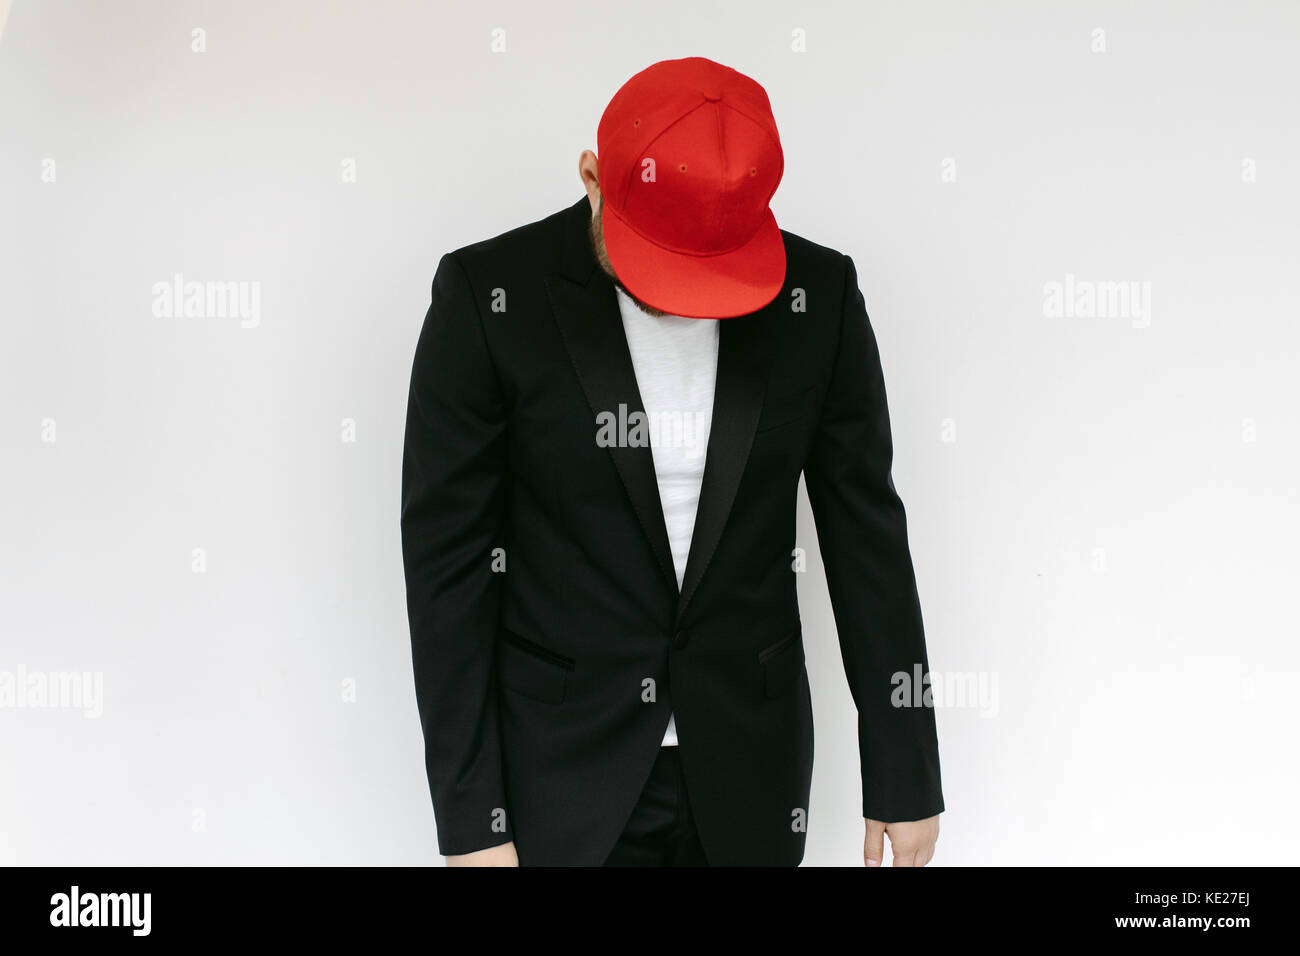 Man in suit and red cap on a white background Stock Photo